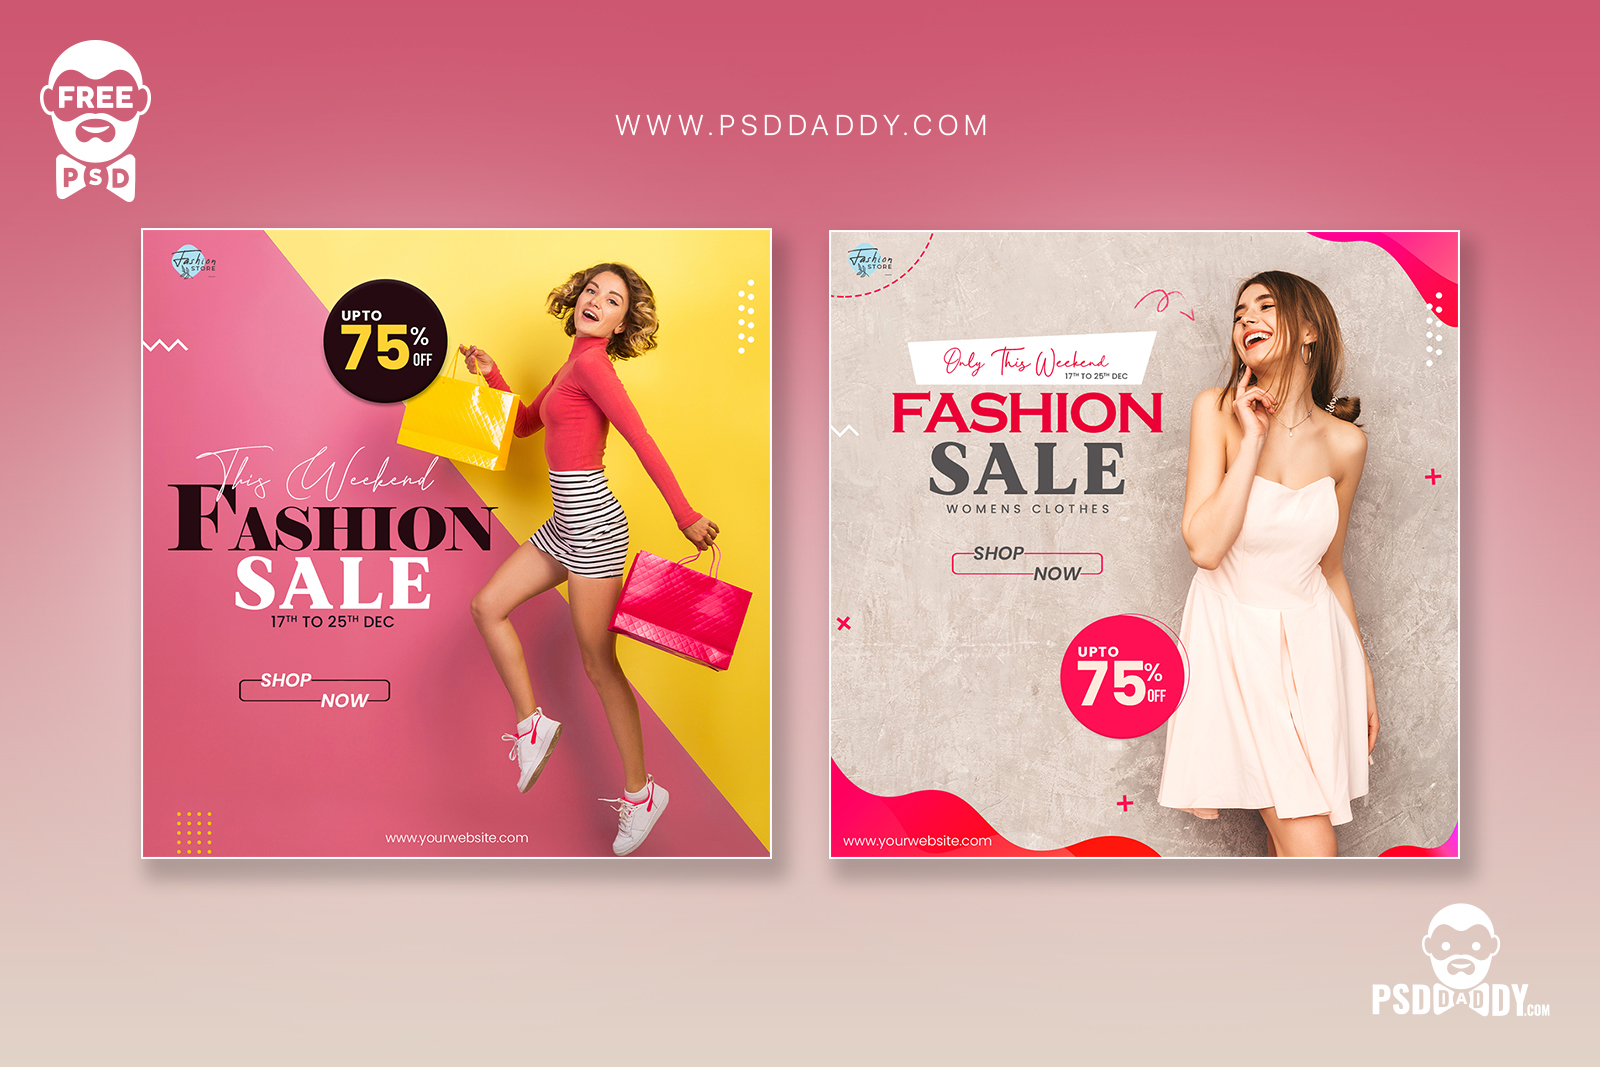 fashion sale online ,myntra fashion sale , clearance sale online india ,online sale ,myntra sale , myntra ,end of season sale 2020 ,sale online shopping clothes ,stock clearance sale clothes ,online shopping sales, flyer meaning ,flyer design ,flyer templates ,flyer size ,flyers example ,flyer design templates ,professional flyer design ,flyer maker online ,advertisement ideas ,social media post examples ,social media posts templates ,social media post design ,social media posts for new website ,100 social media post ideas ,creative social media posts ,creative social media posts examples ,social media post ideas for business